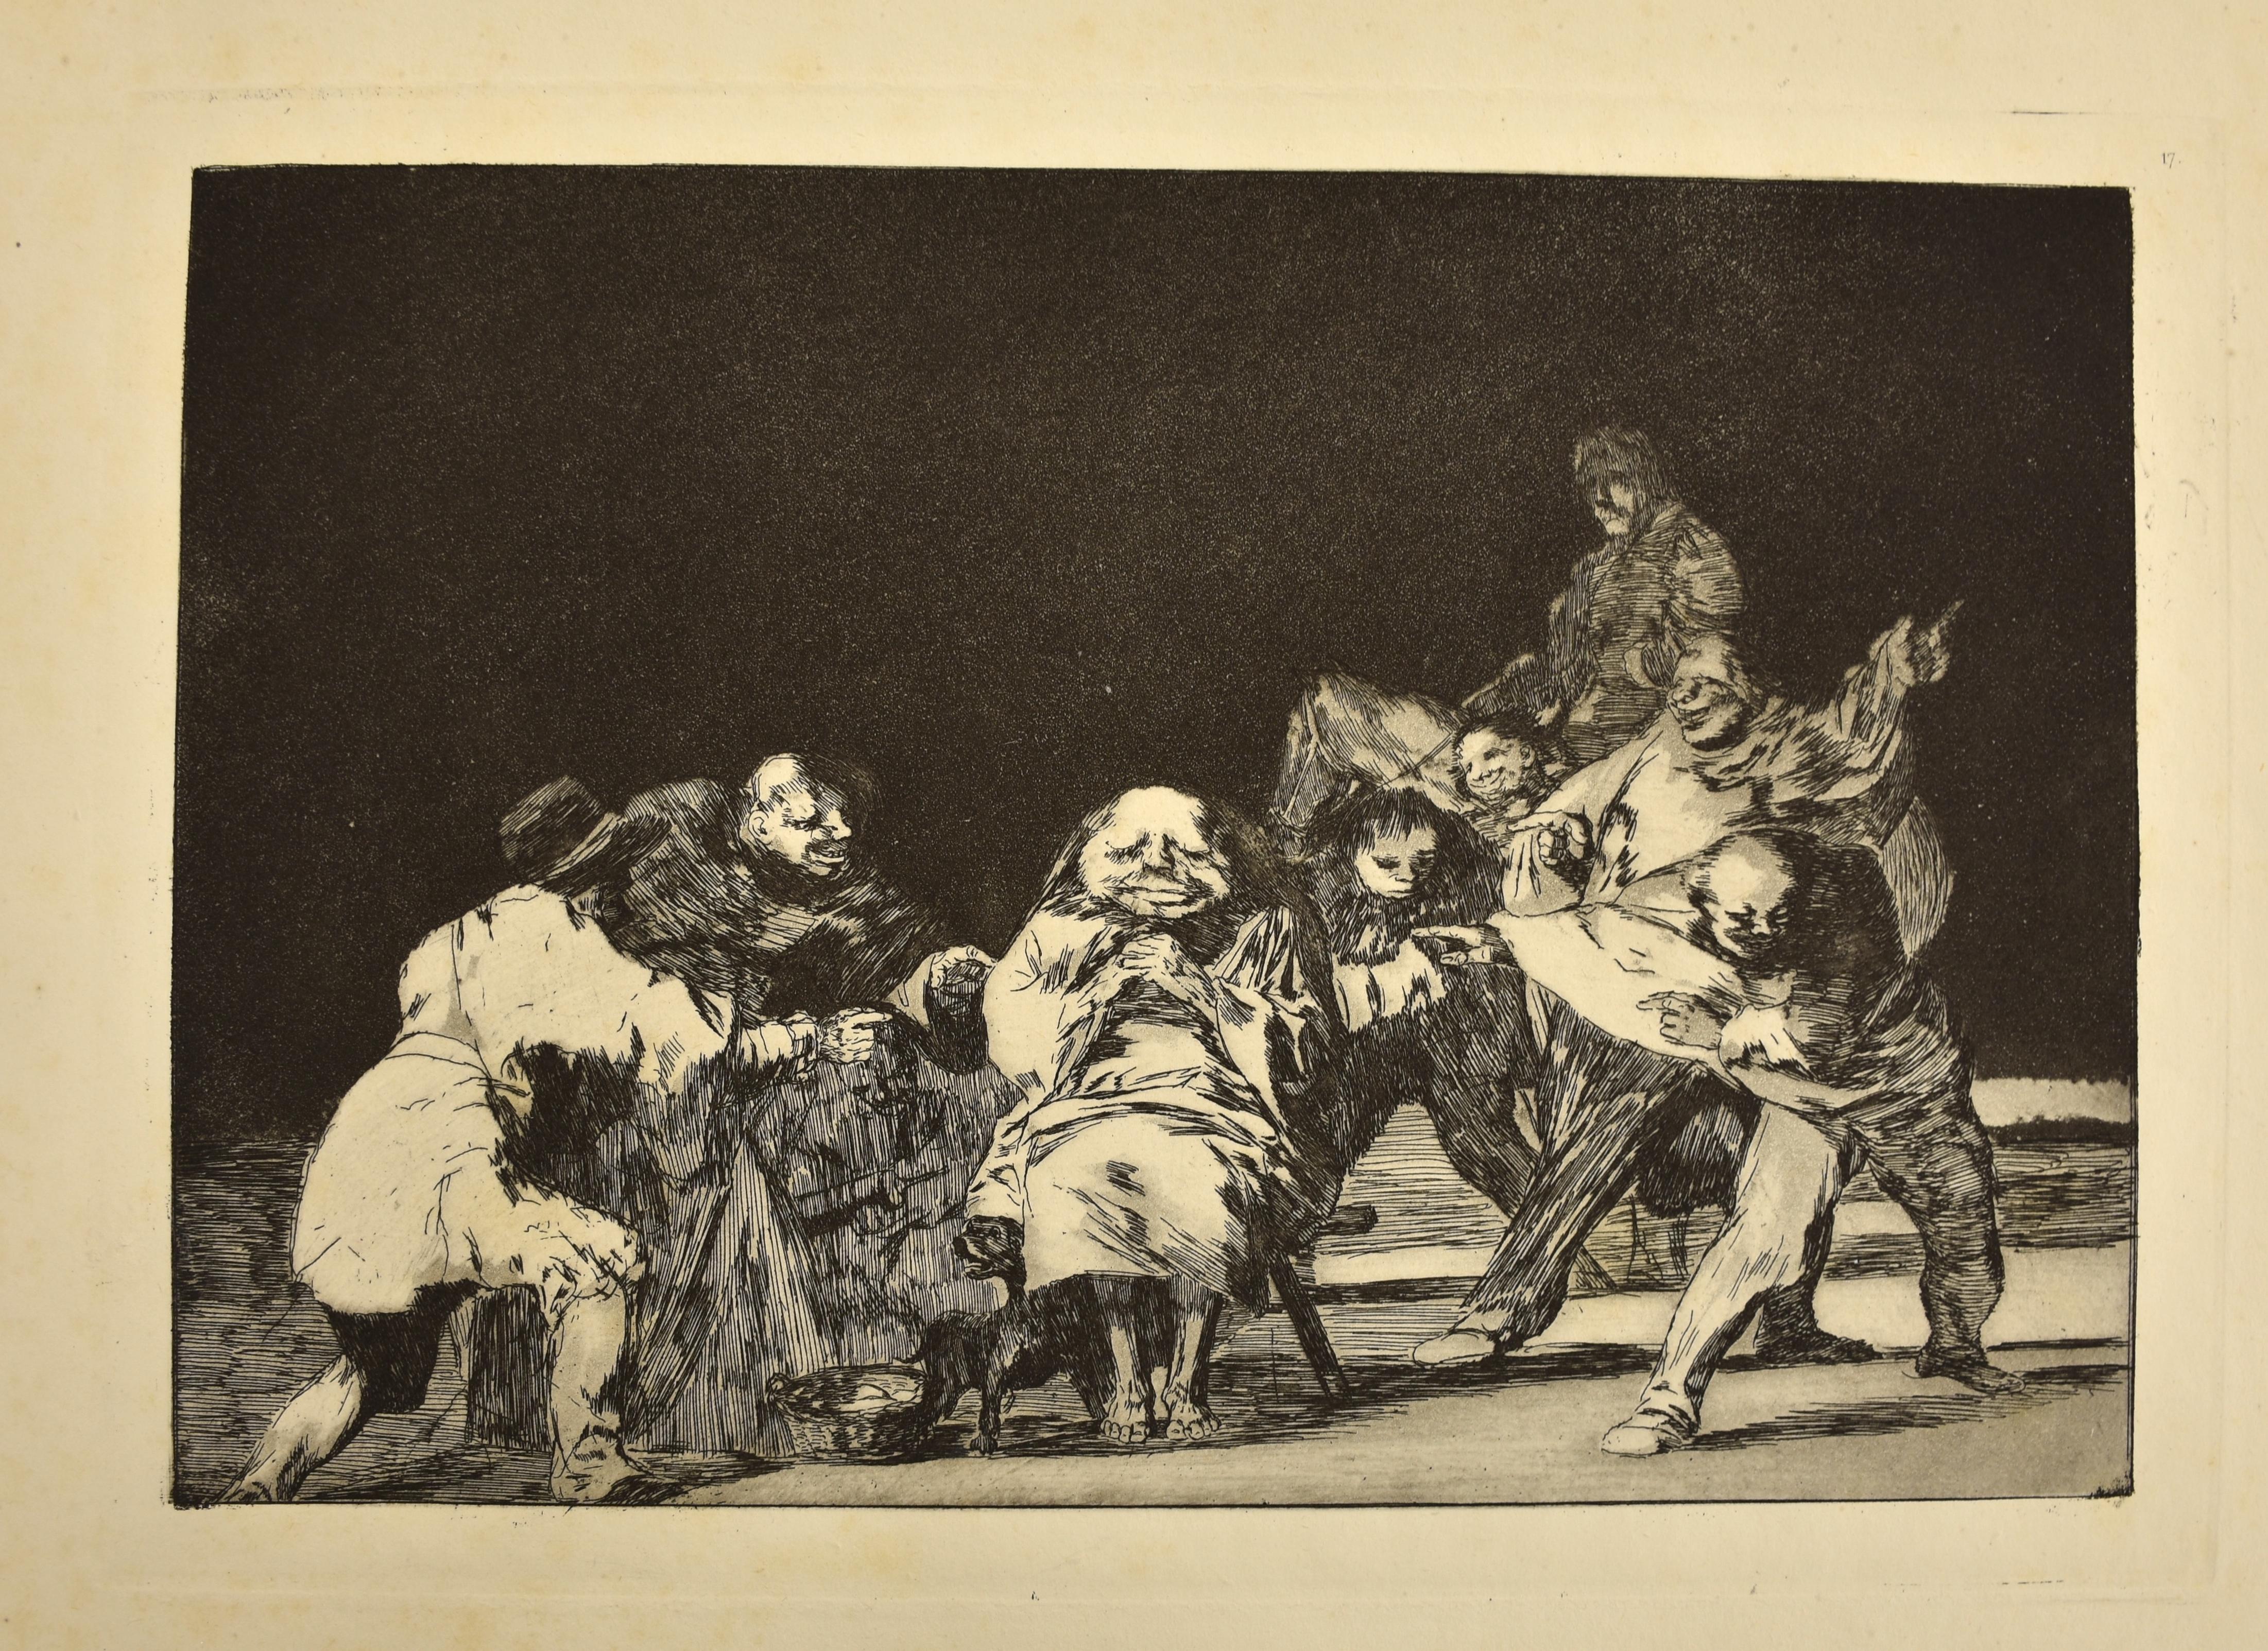 Complete Collection of Los Proverbios by Francisco Goya - 1875 3